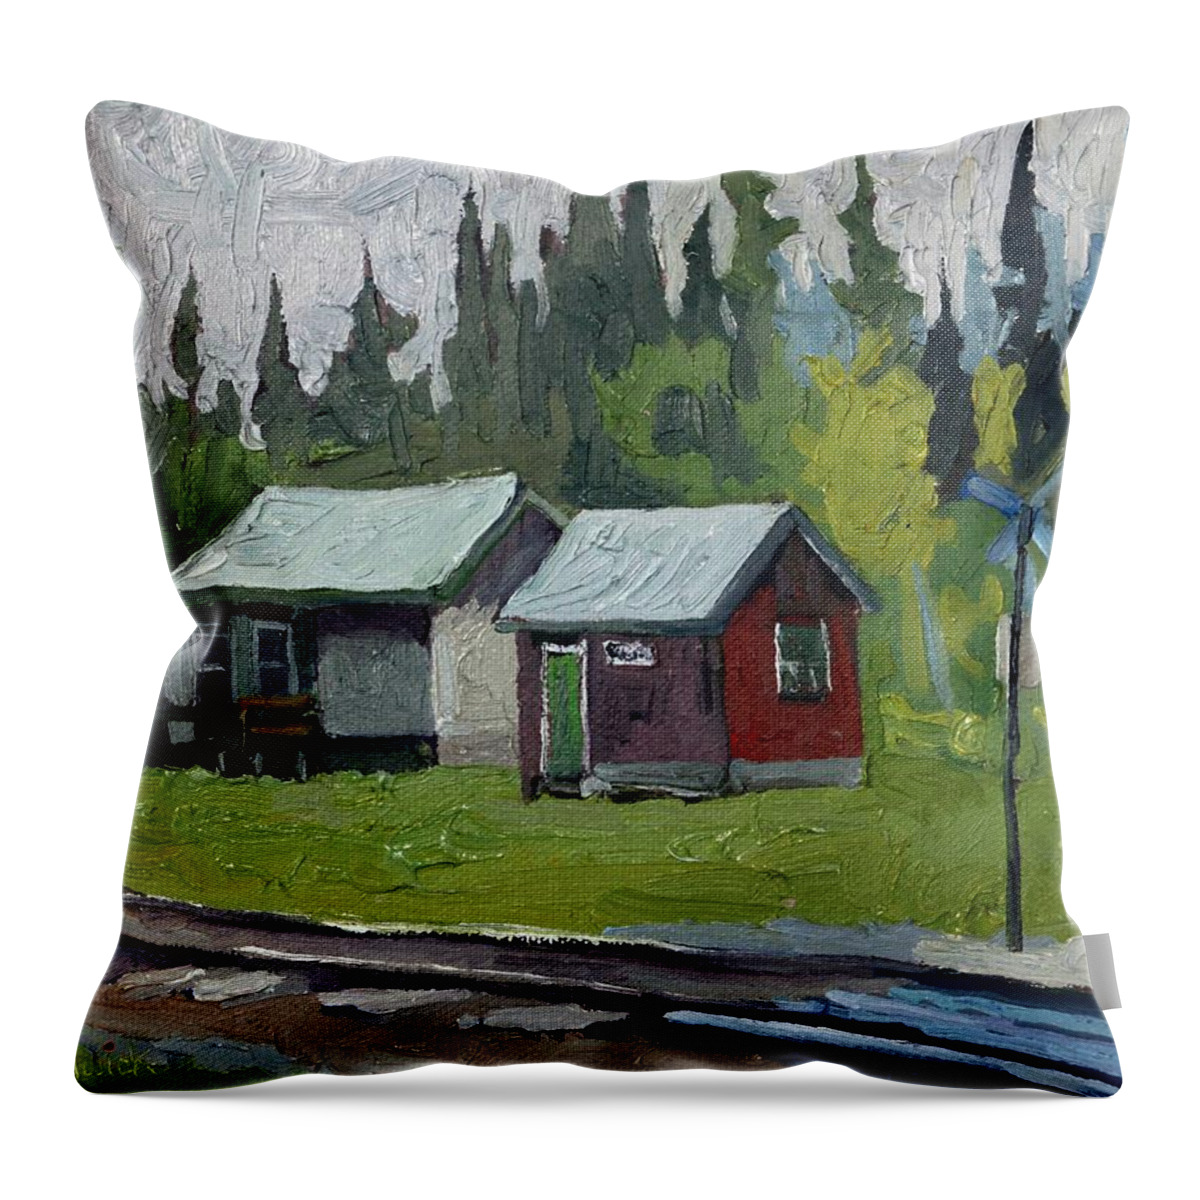 2190 Throw Pillow featuring the painting Frater Superior East by Phil Chadwick